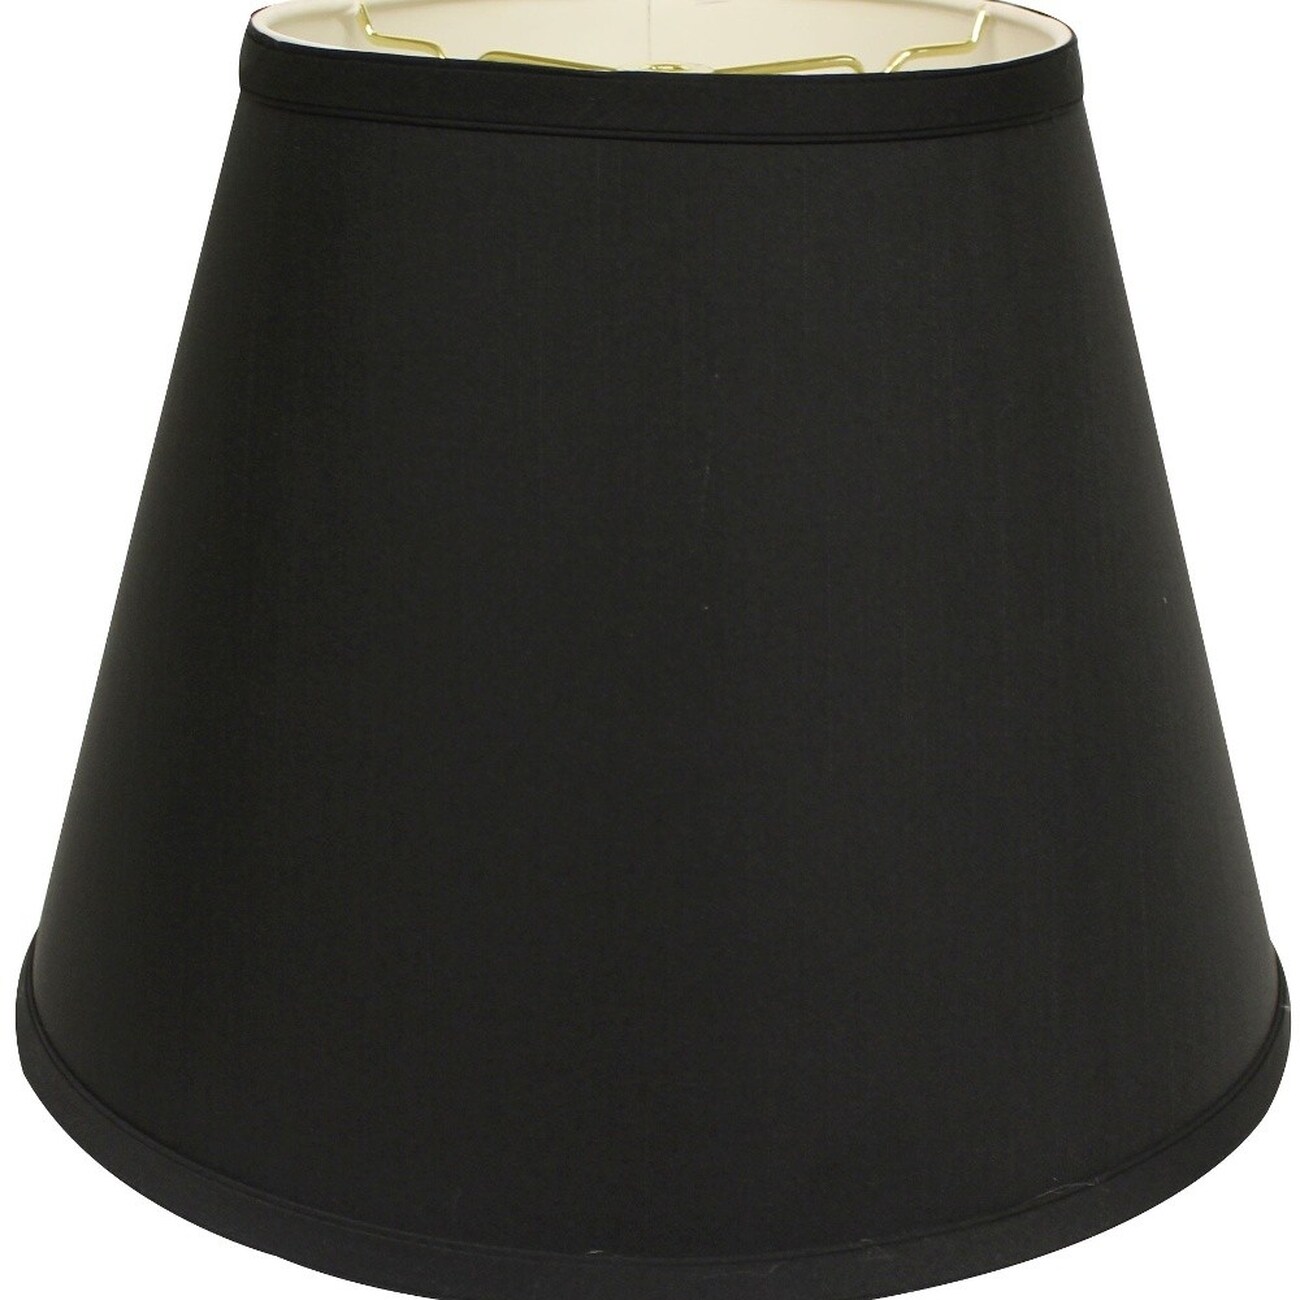 HomeRoots 13-in x 18-in Black Silk Empire Lamp Shade in the Lamp Shades ...